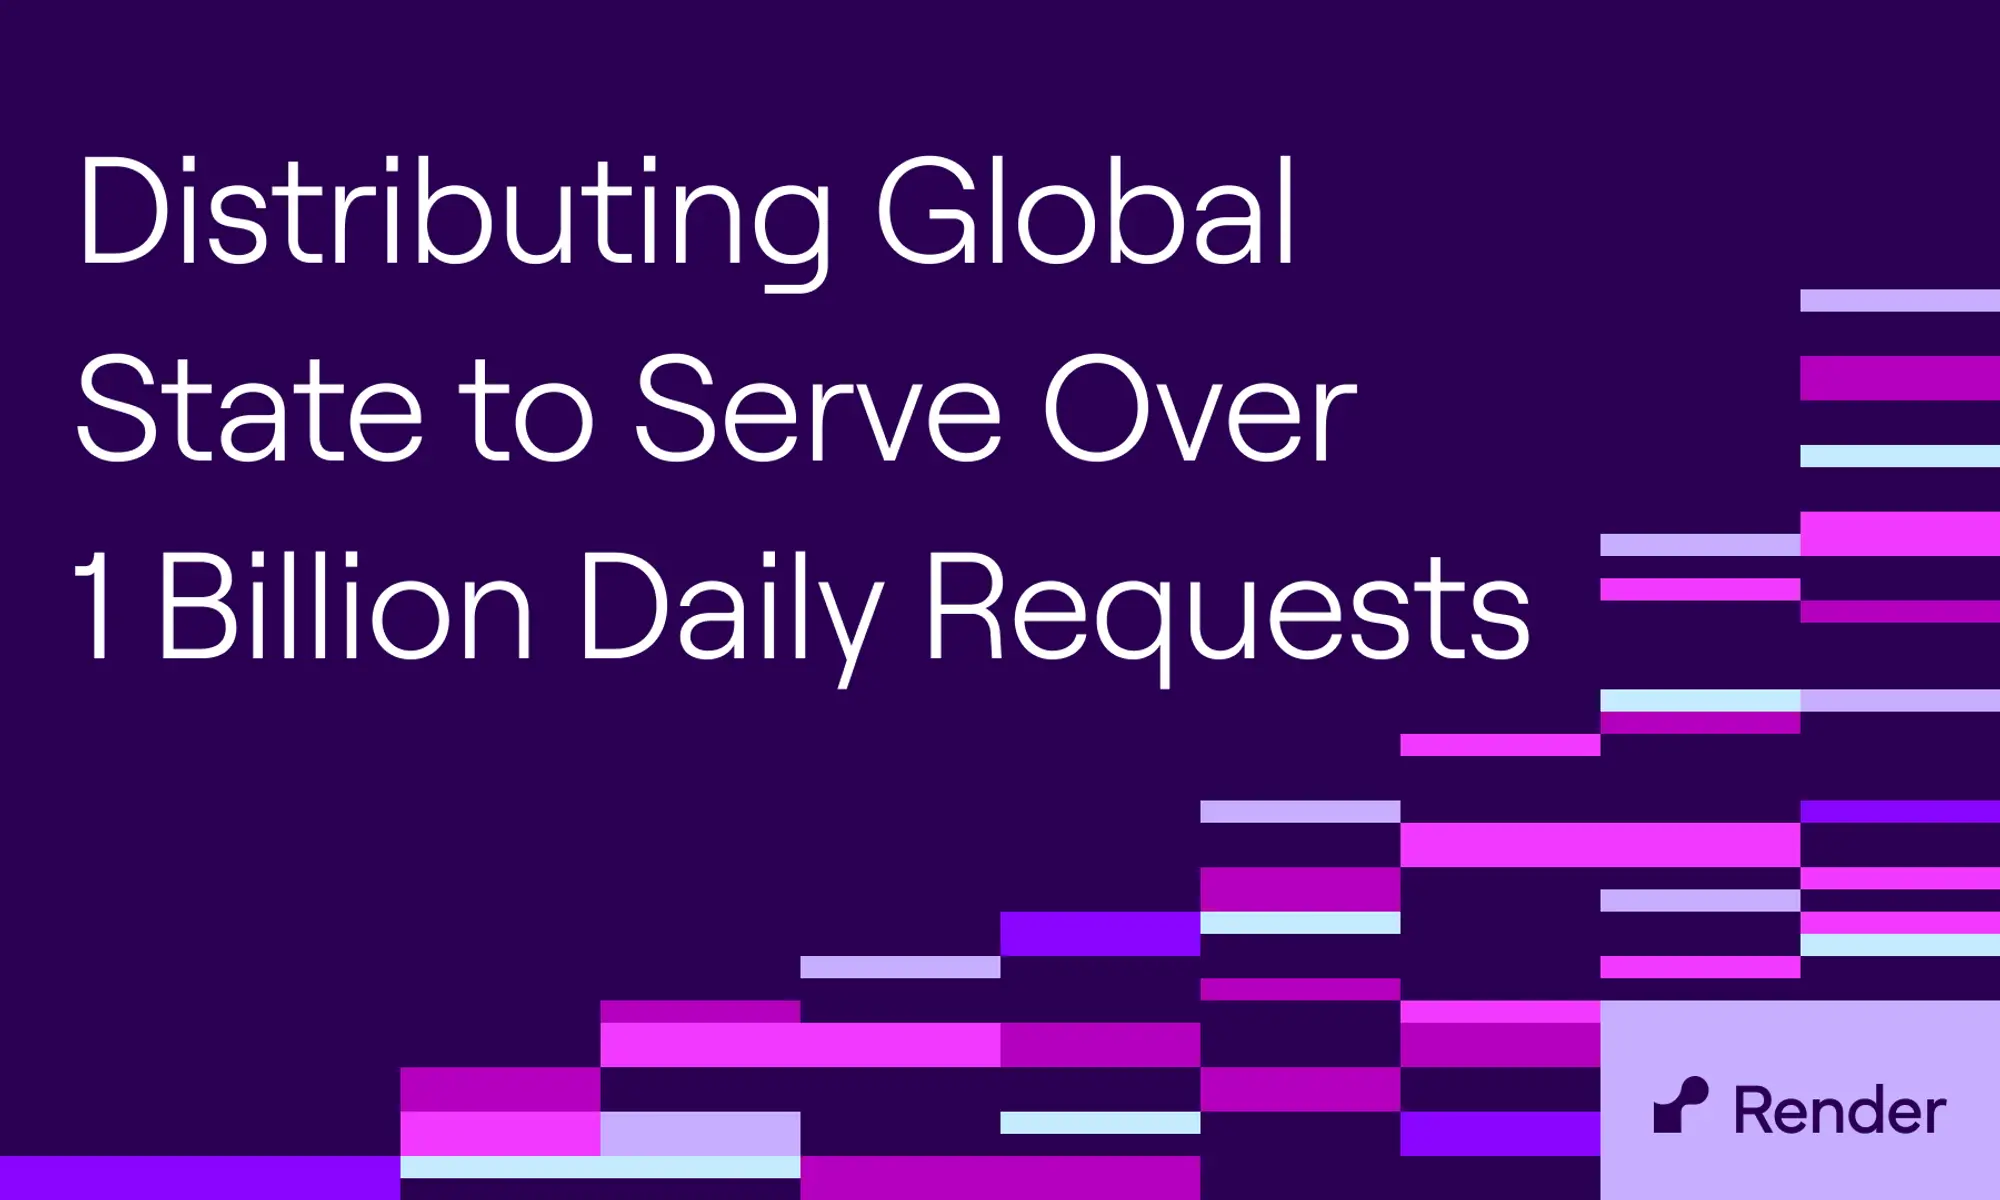 Distributing Global State to Serve over 1 Billion Daily Requests